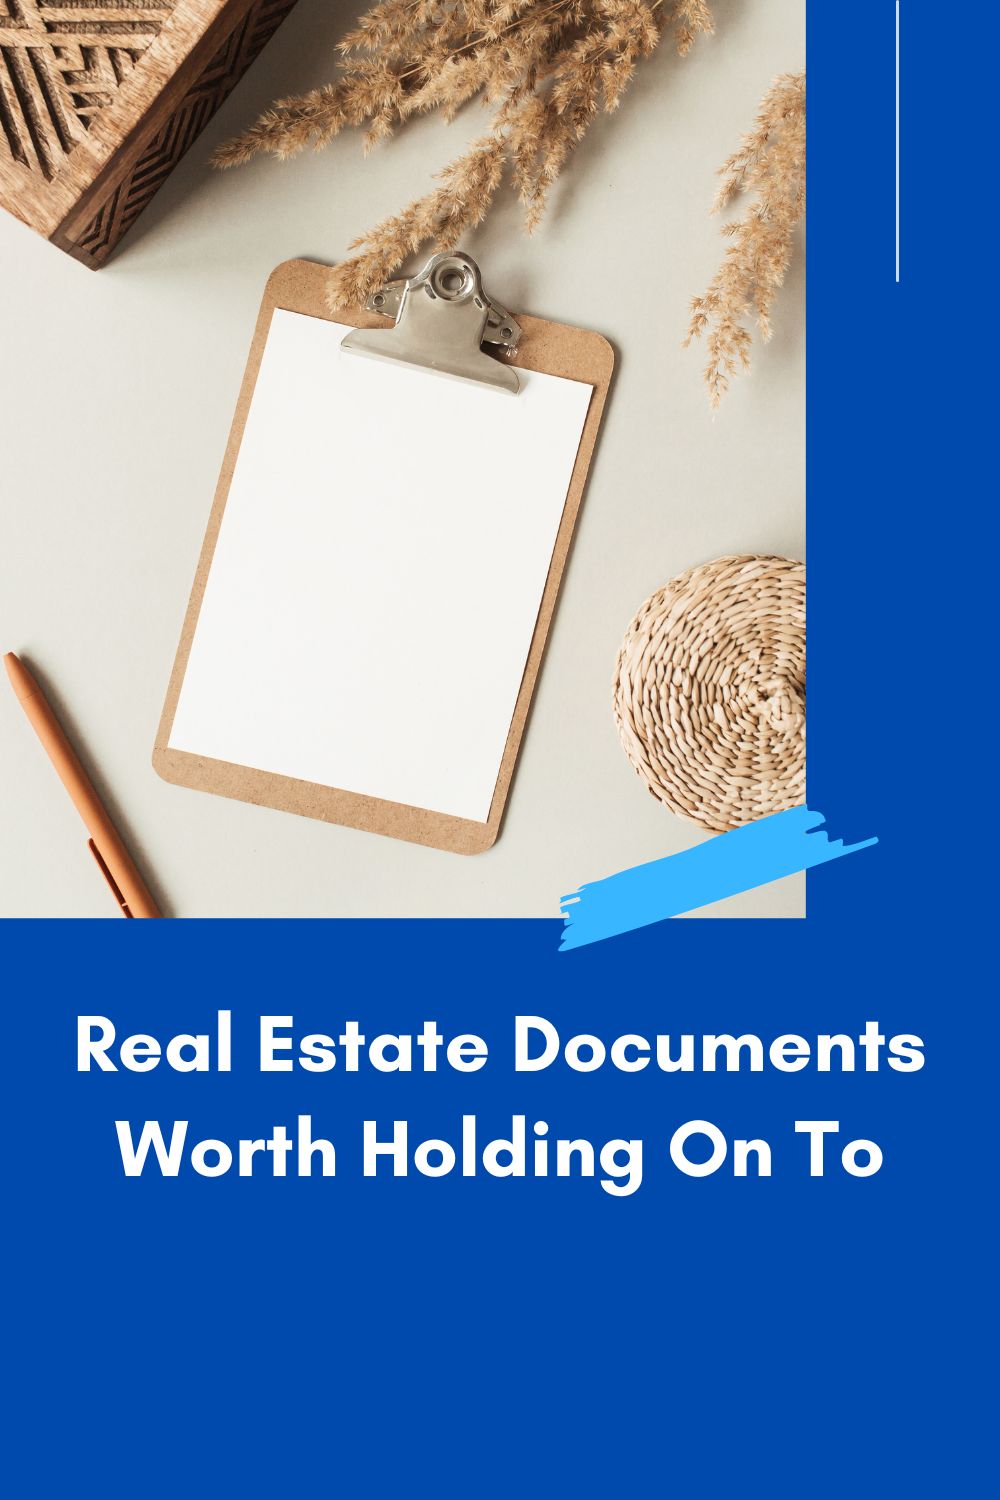 Real Estate Documents Worth Holding On To